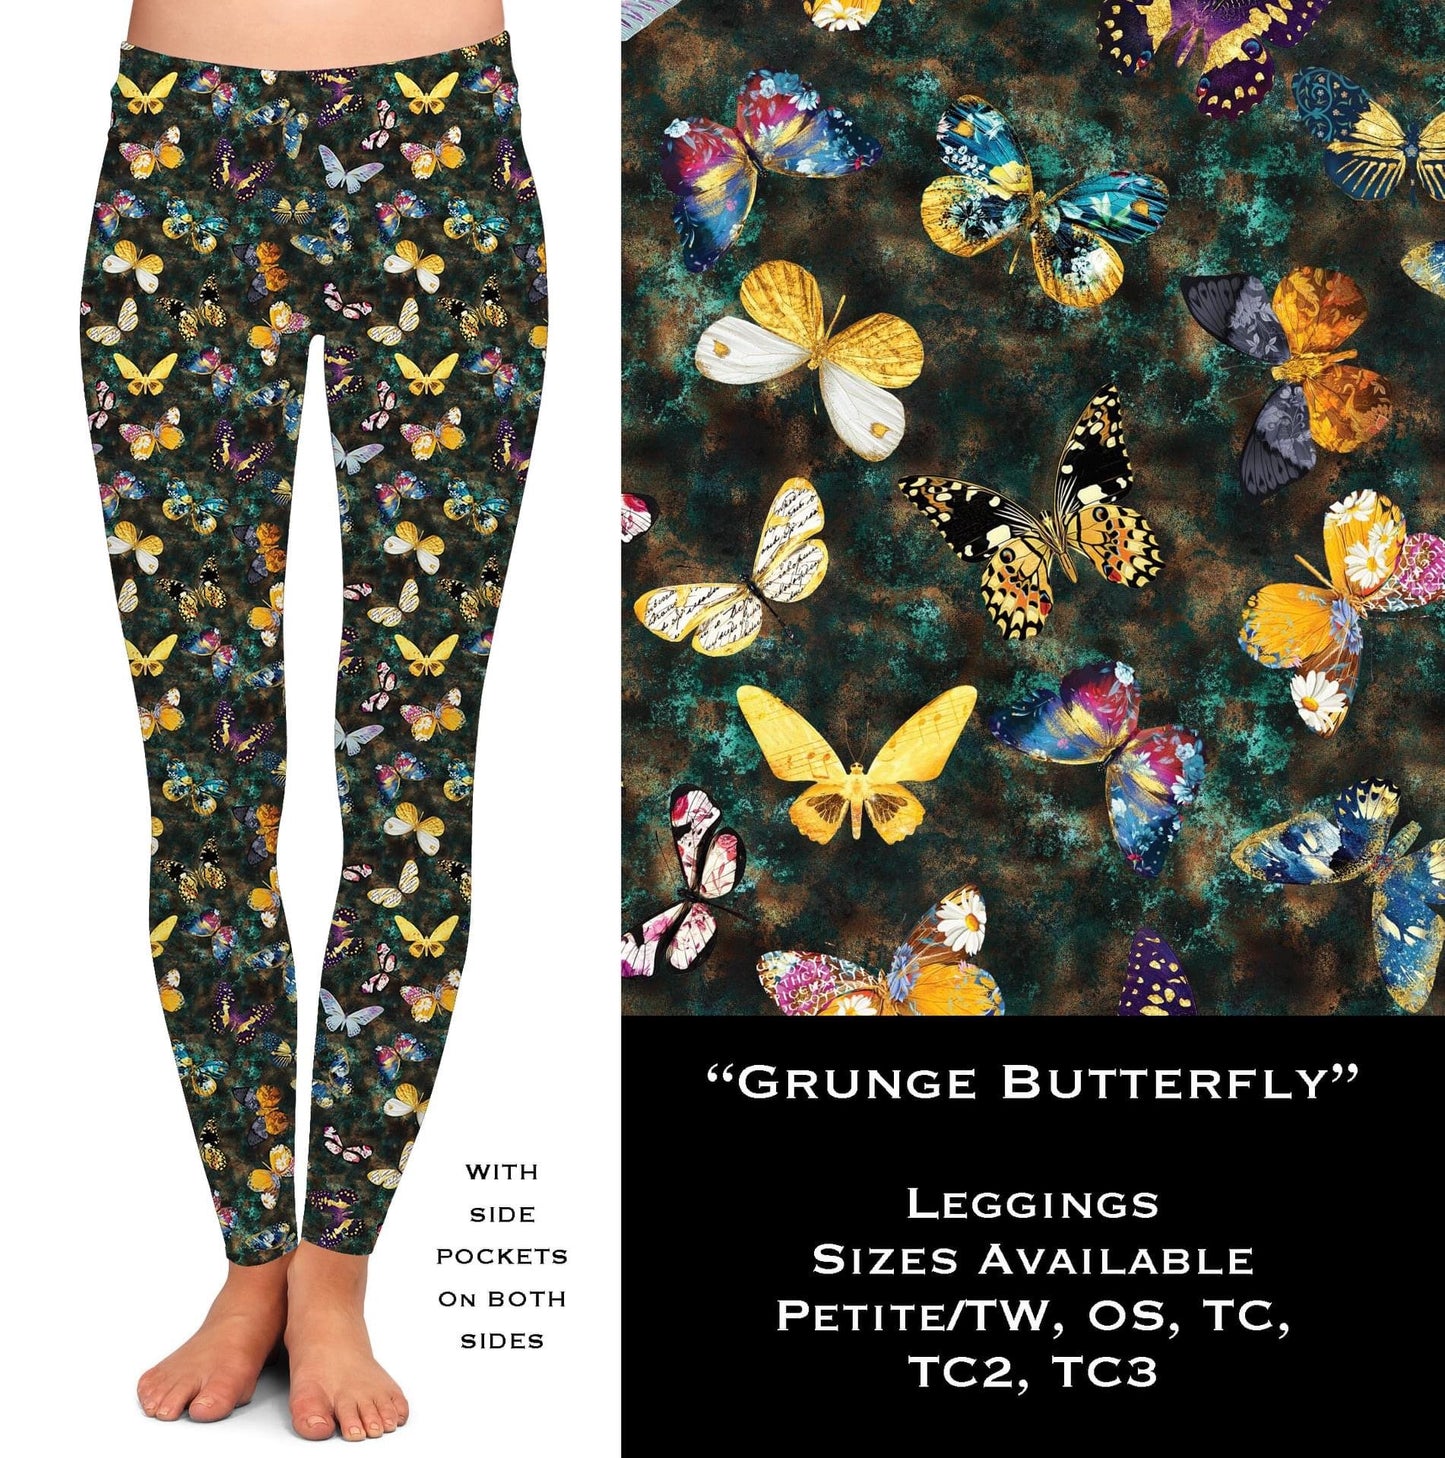 Grunge Butterfly Leggings with Pockets